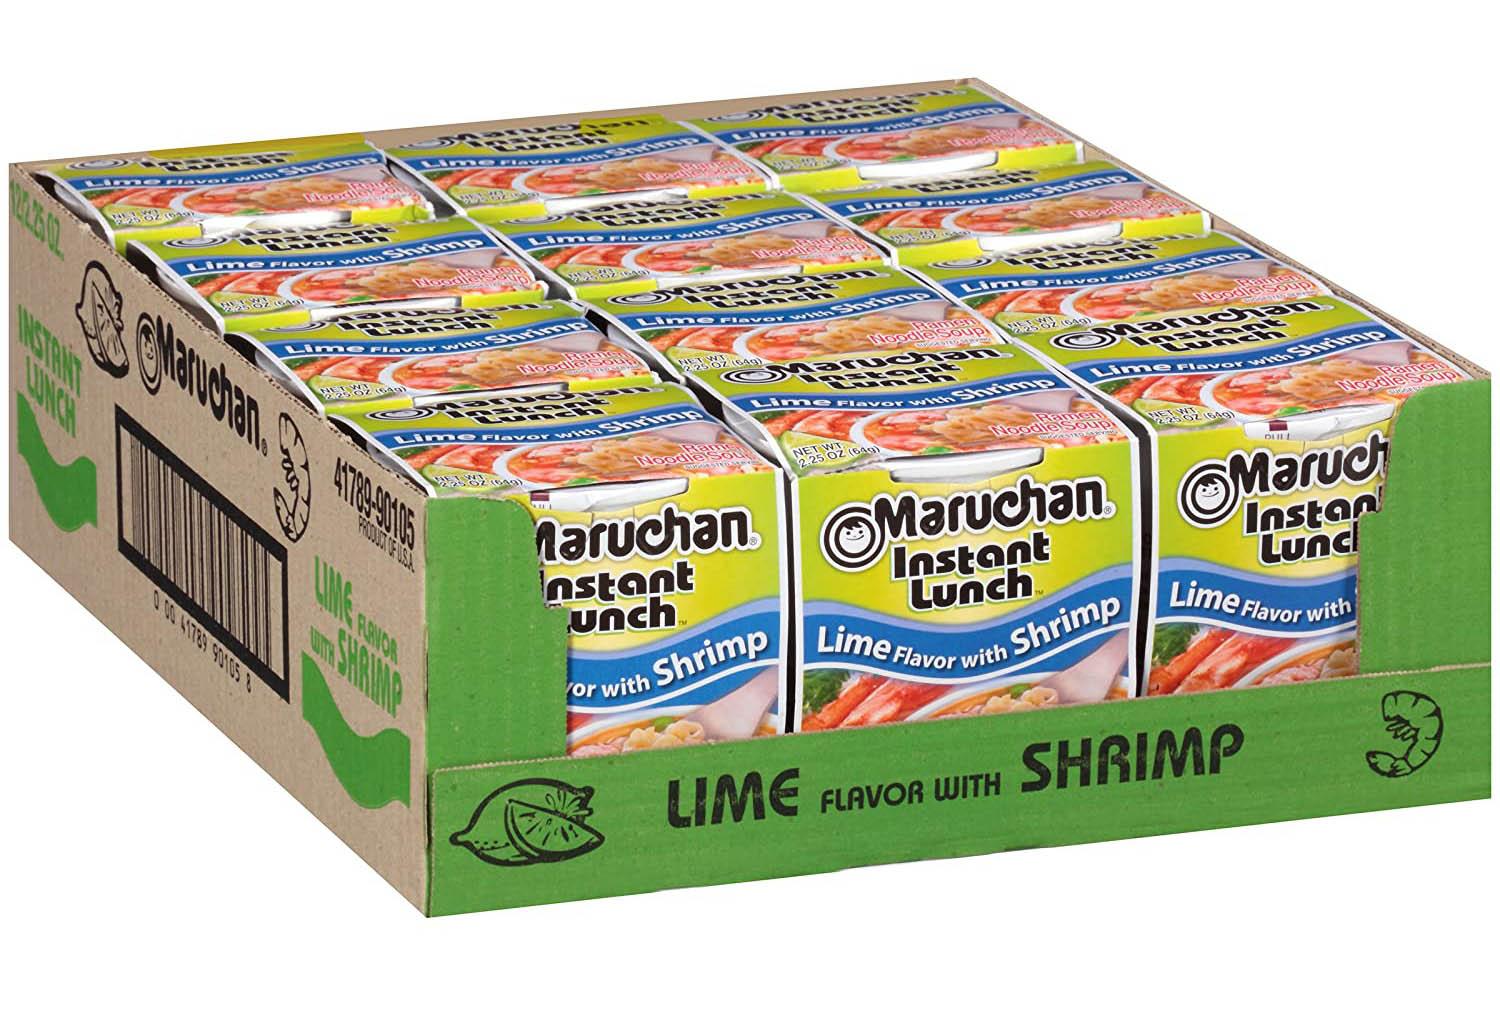 12 Maruchan Instant Lunch Lime with Shrimp Cup Noodles for $4.44 Shipped